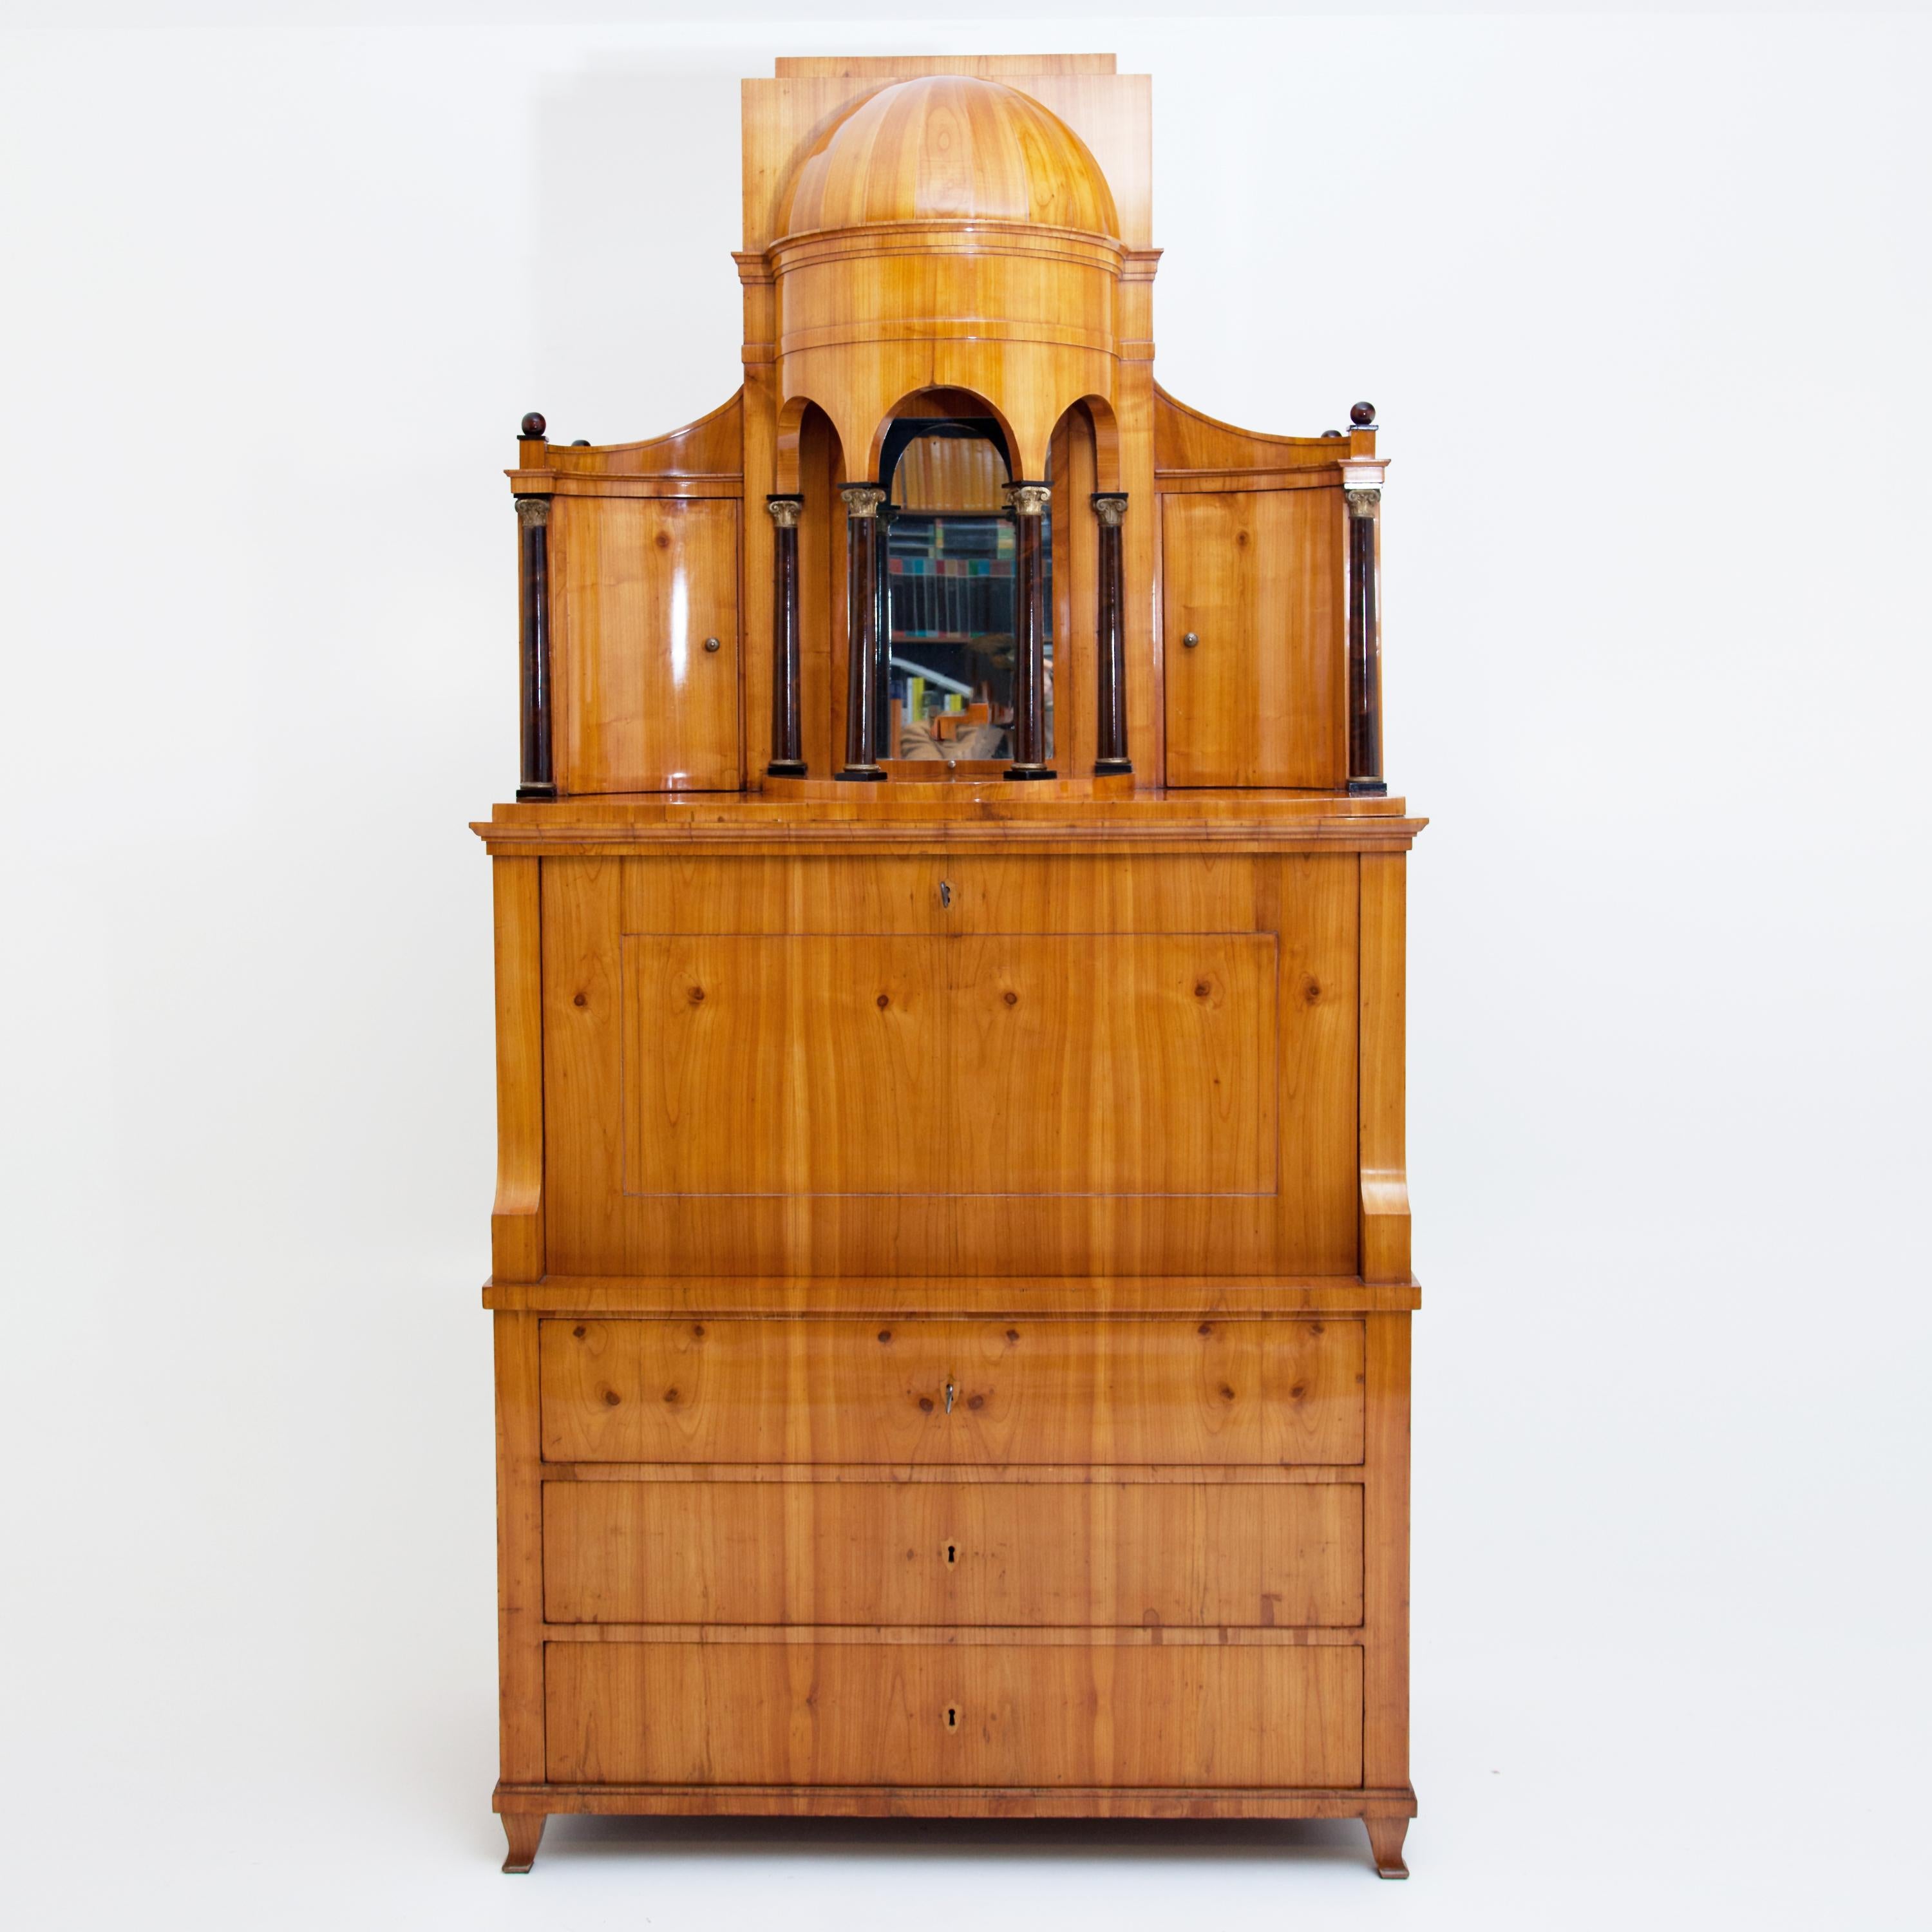 A secretaire with writing flap and an architectural top with partially gilded columns and half-dome rising above a three-drawered chest of drawers. Two concave side doors with slightly rising cornice lead to the high semi-dome with stepped top. The